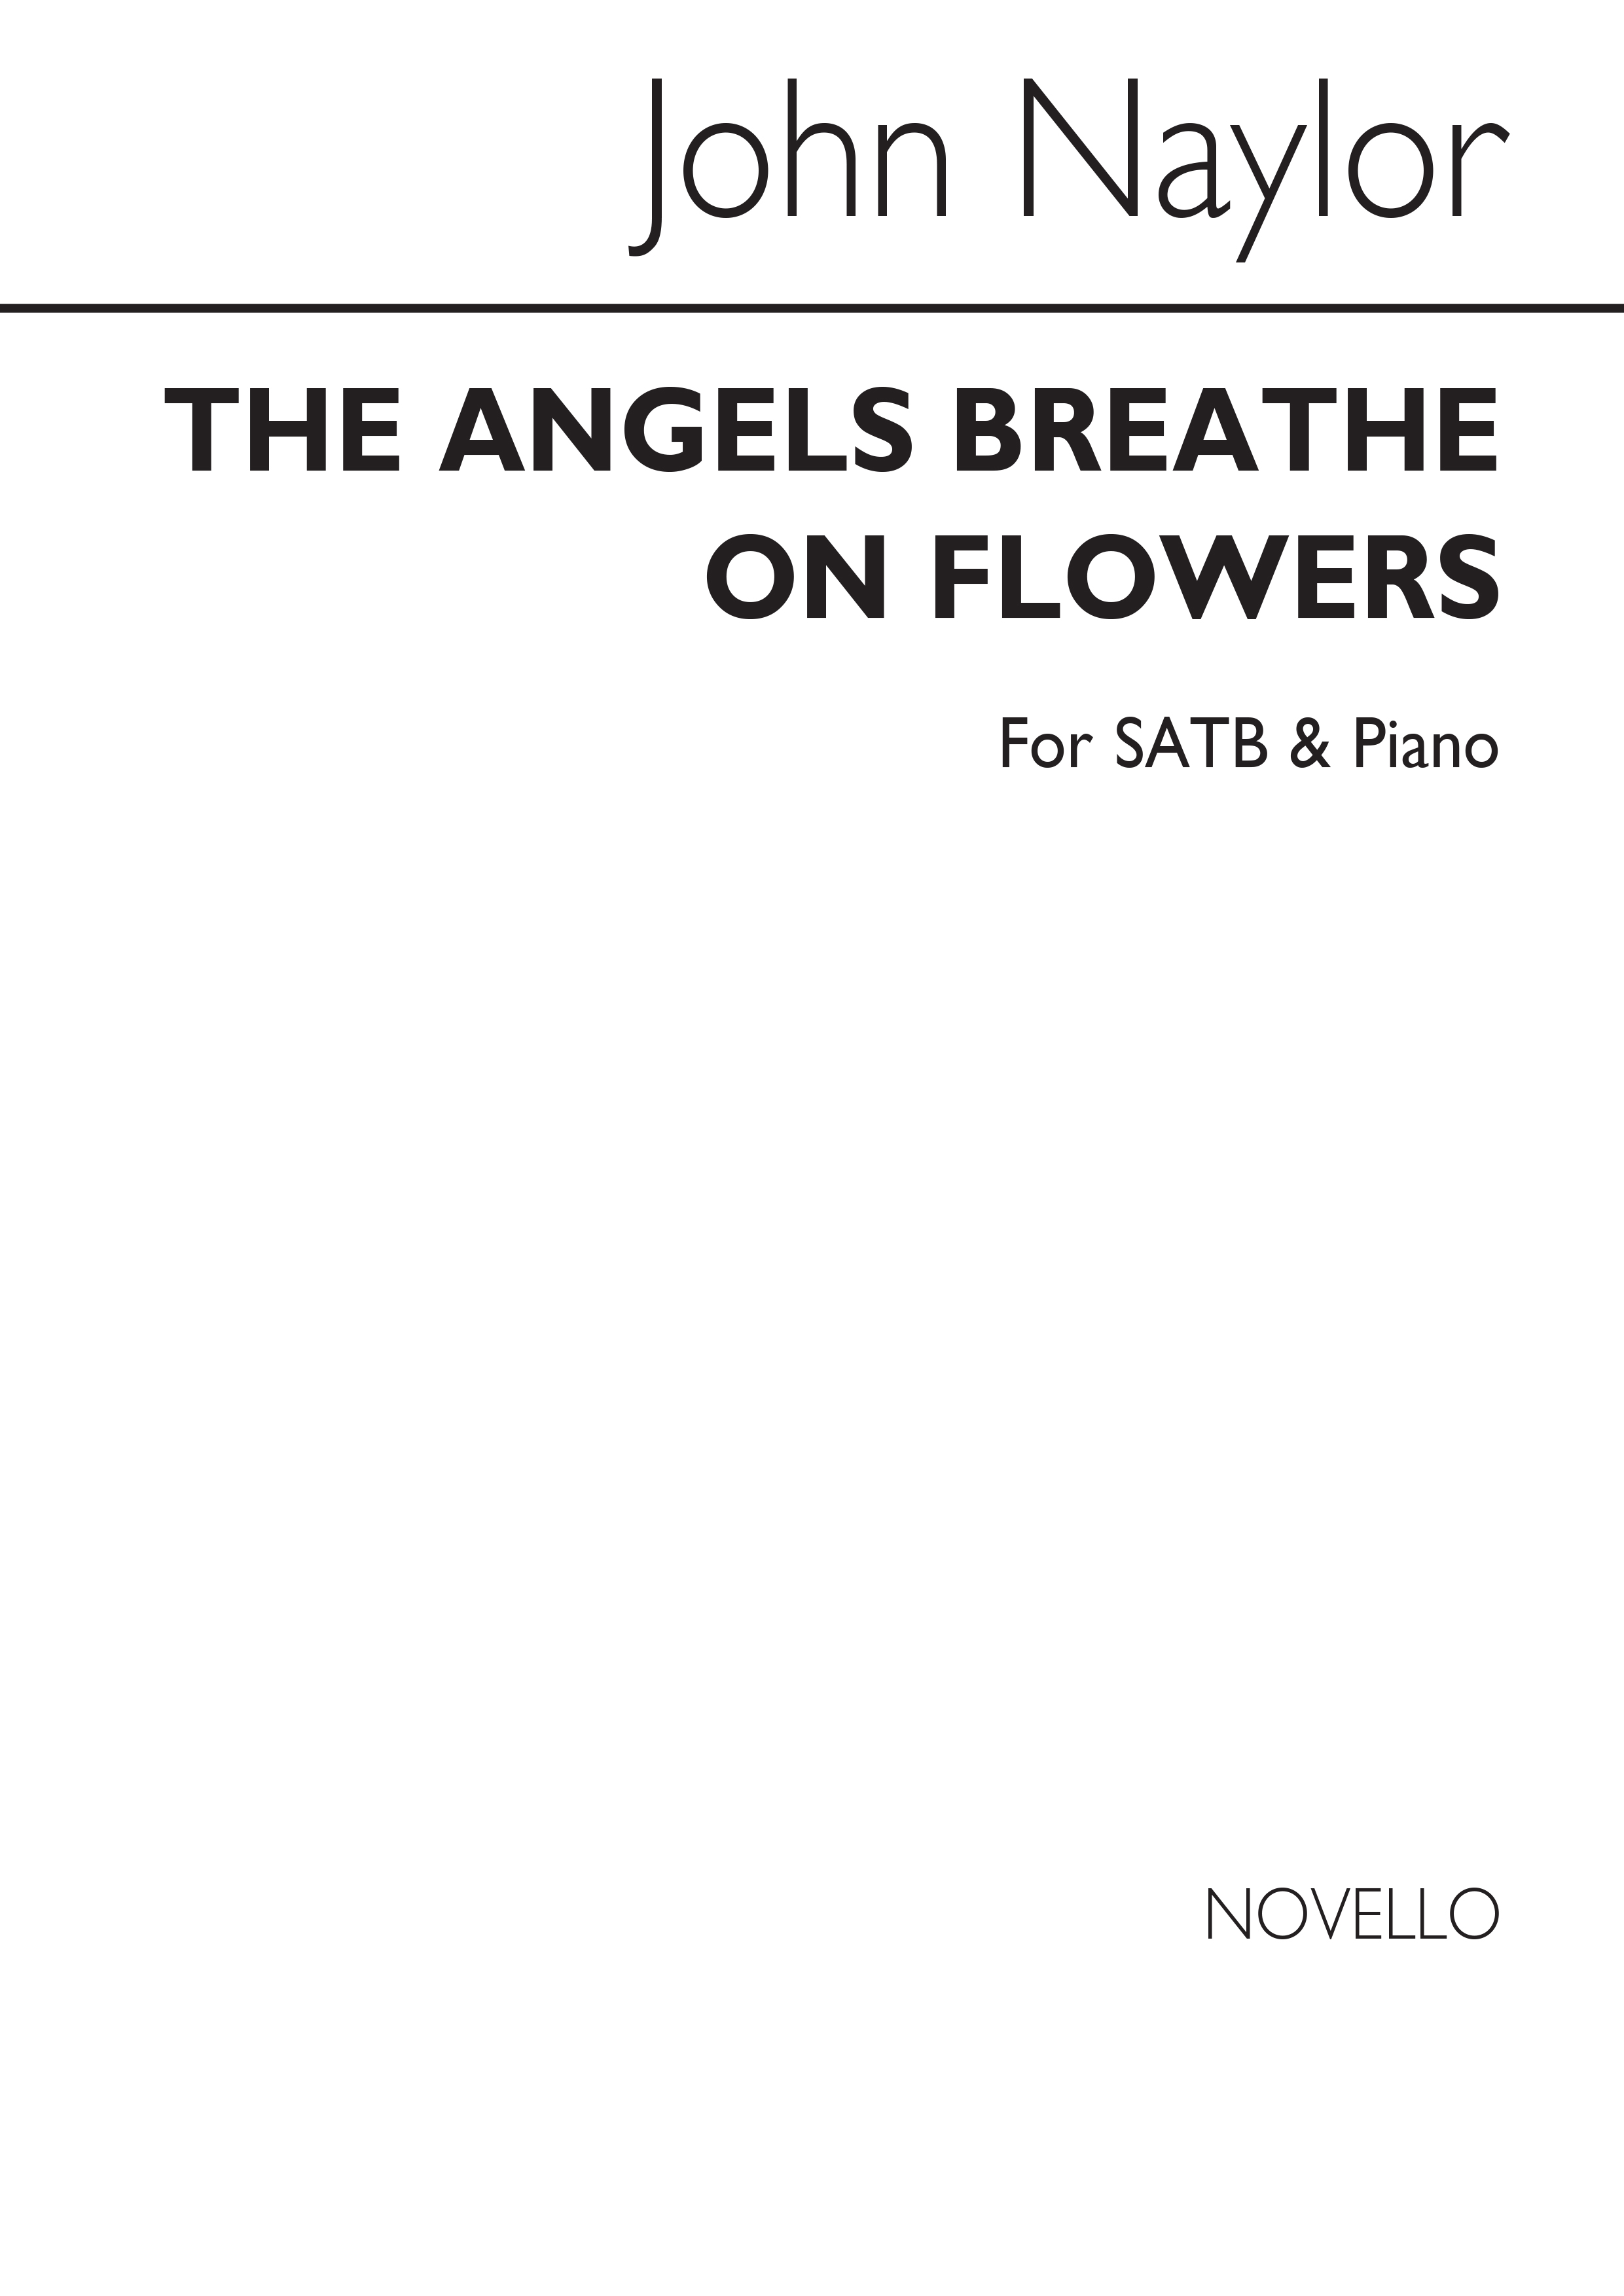 John Naylor: The Angels Breathe On Flowers Satb/Piano